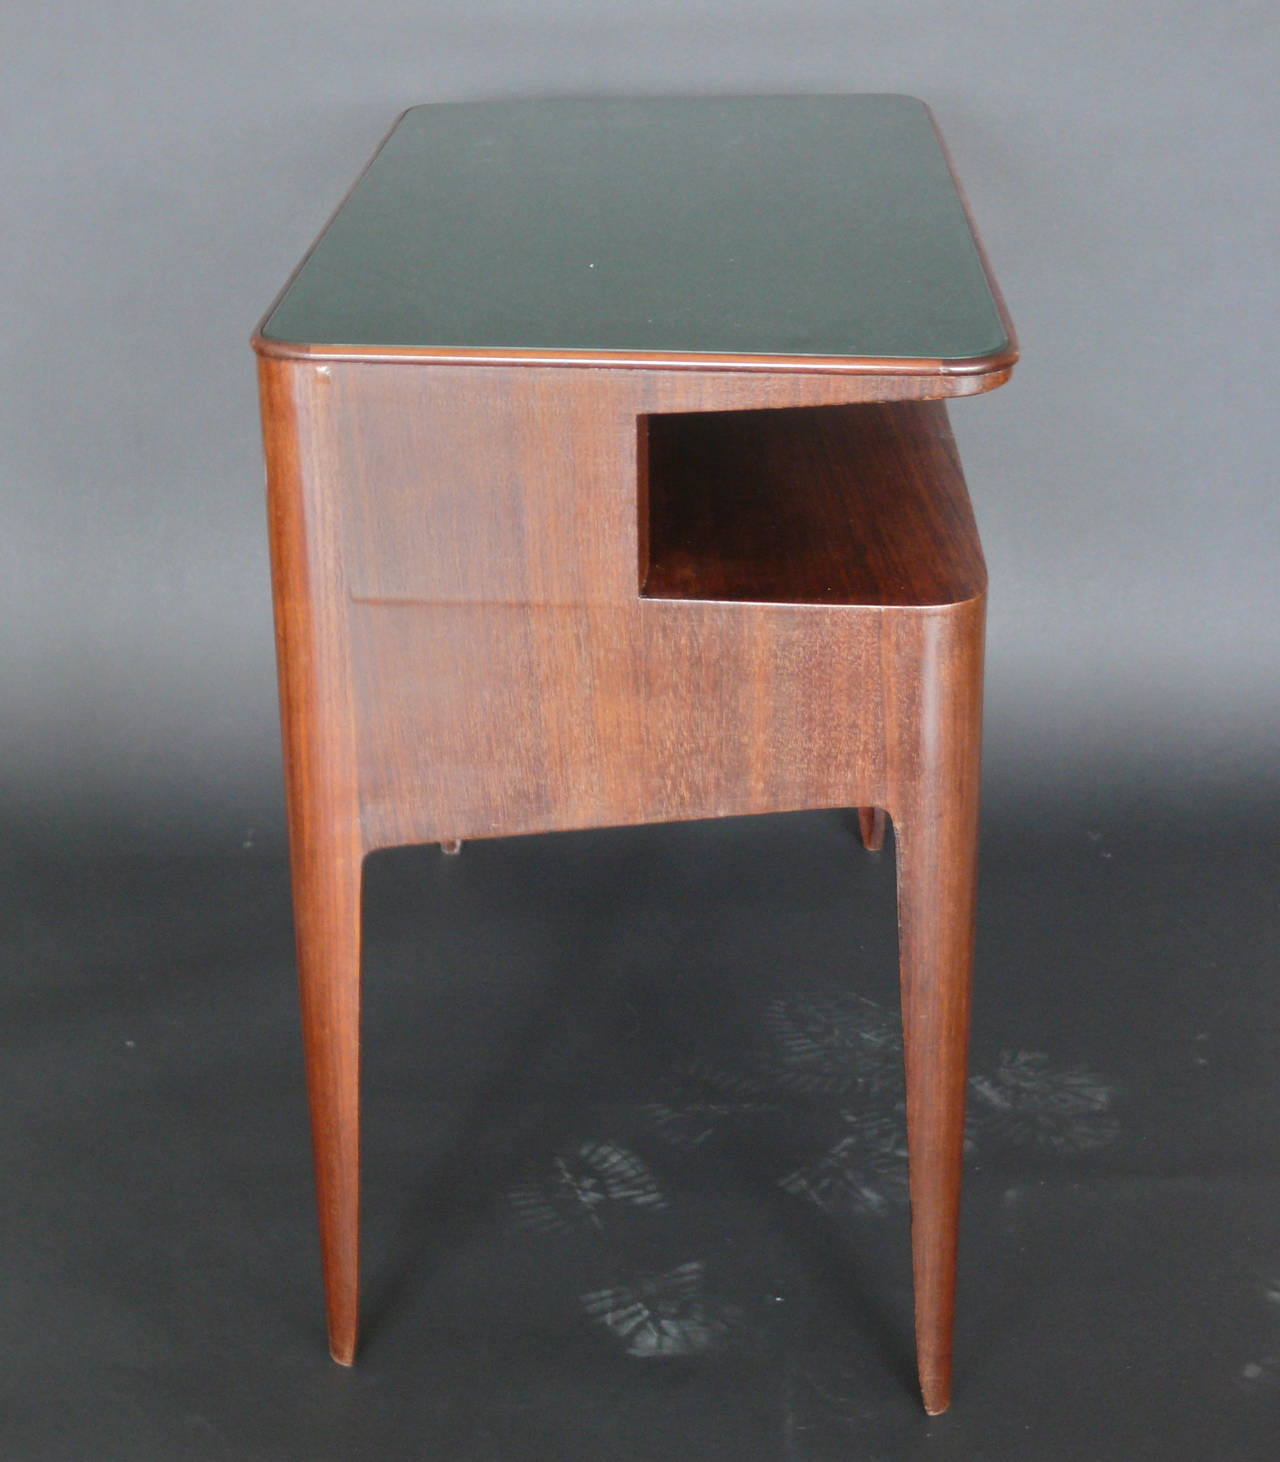 Elegant vanity by Gio Ponti. Rosewood vanity with green inlaid stamped glass top by Fontana Arte. (Stamped Fontana on underside of glass) Tapered legs and open shelf. Very rare piece. Excellent vintage condition. Vanity is cataloged in the Gio Ponti